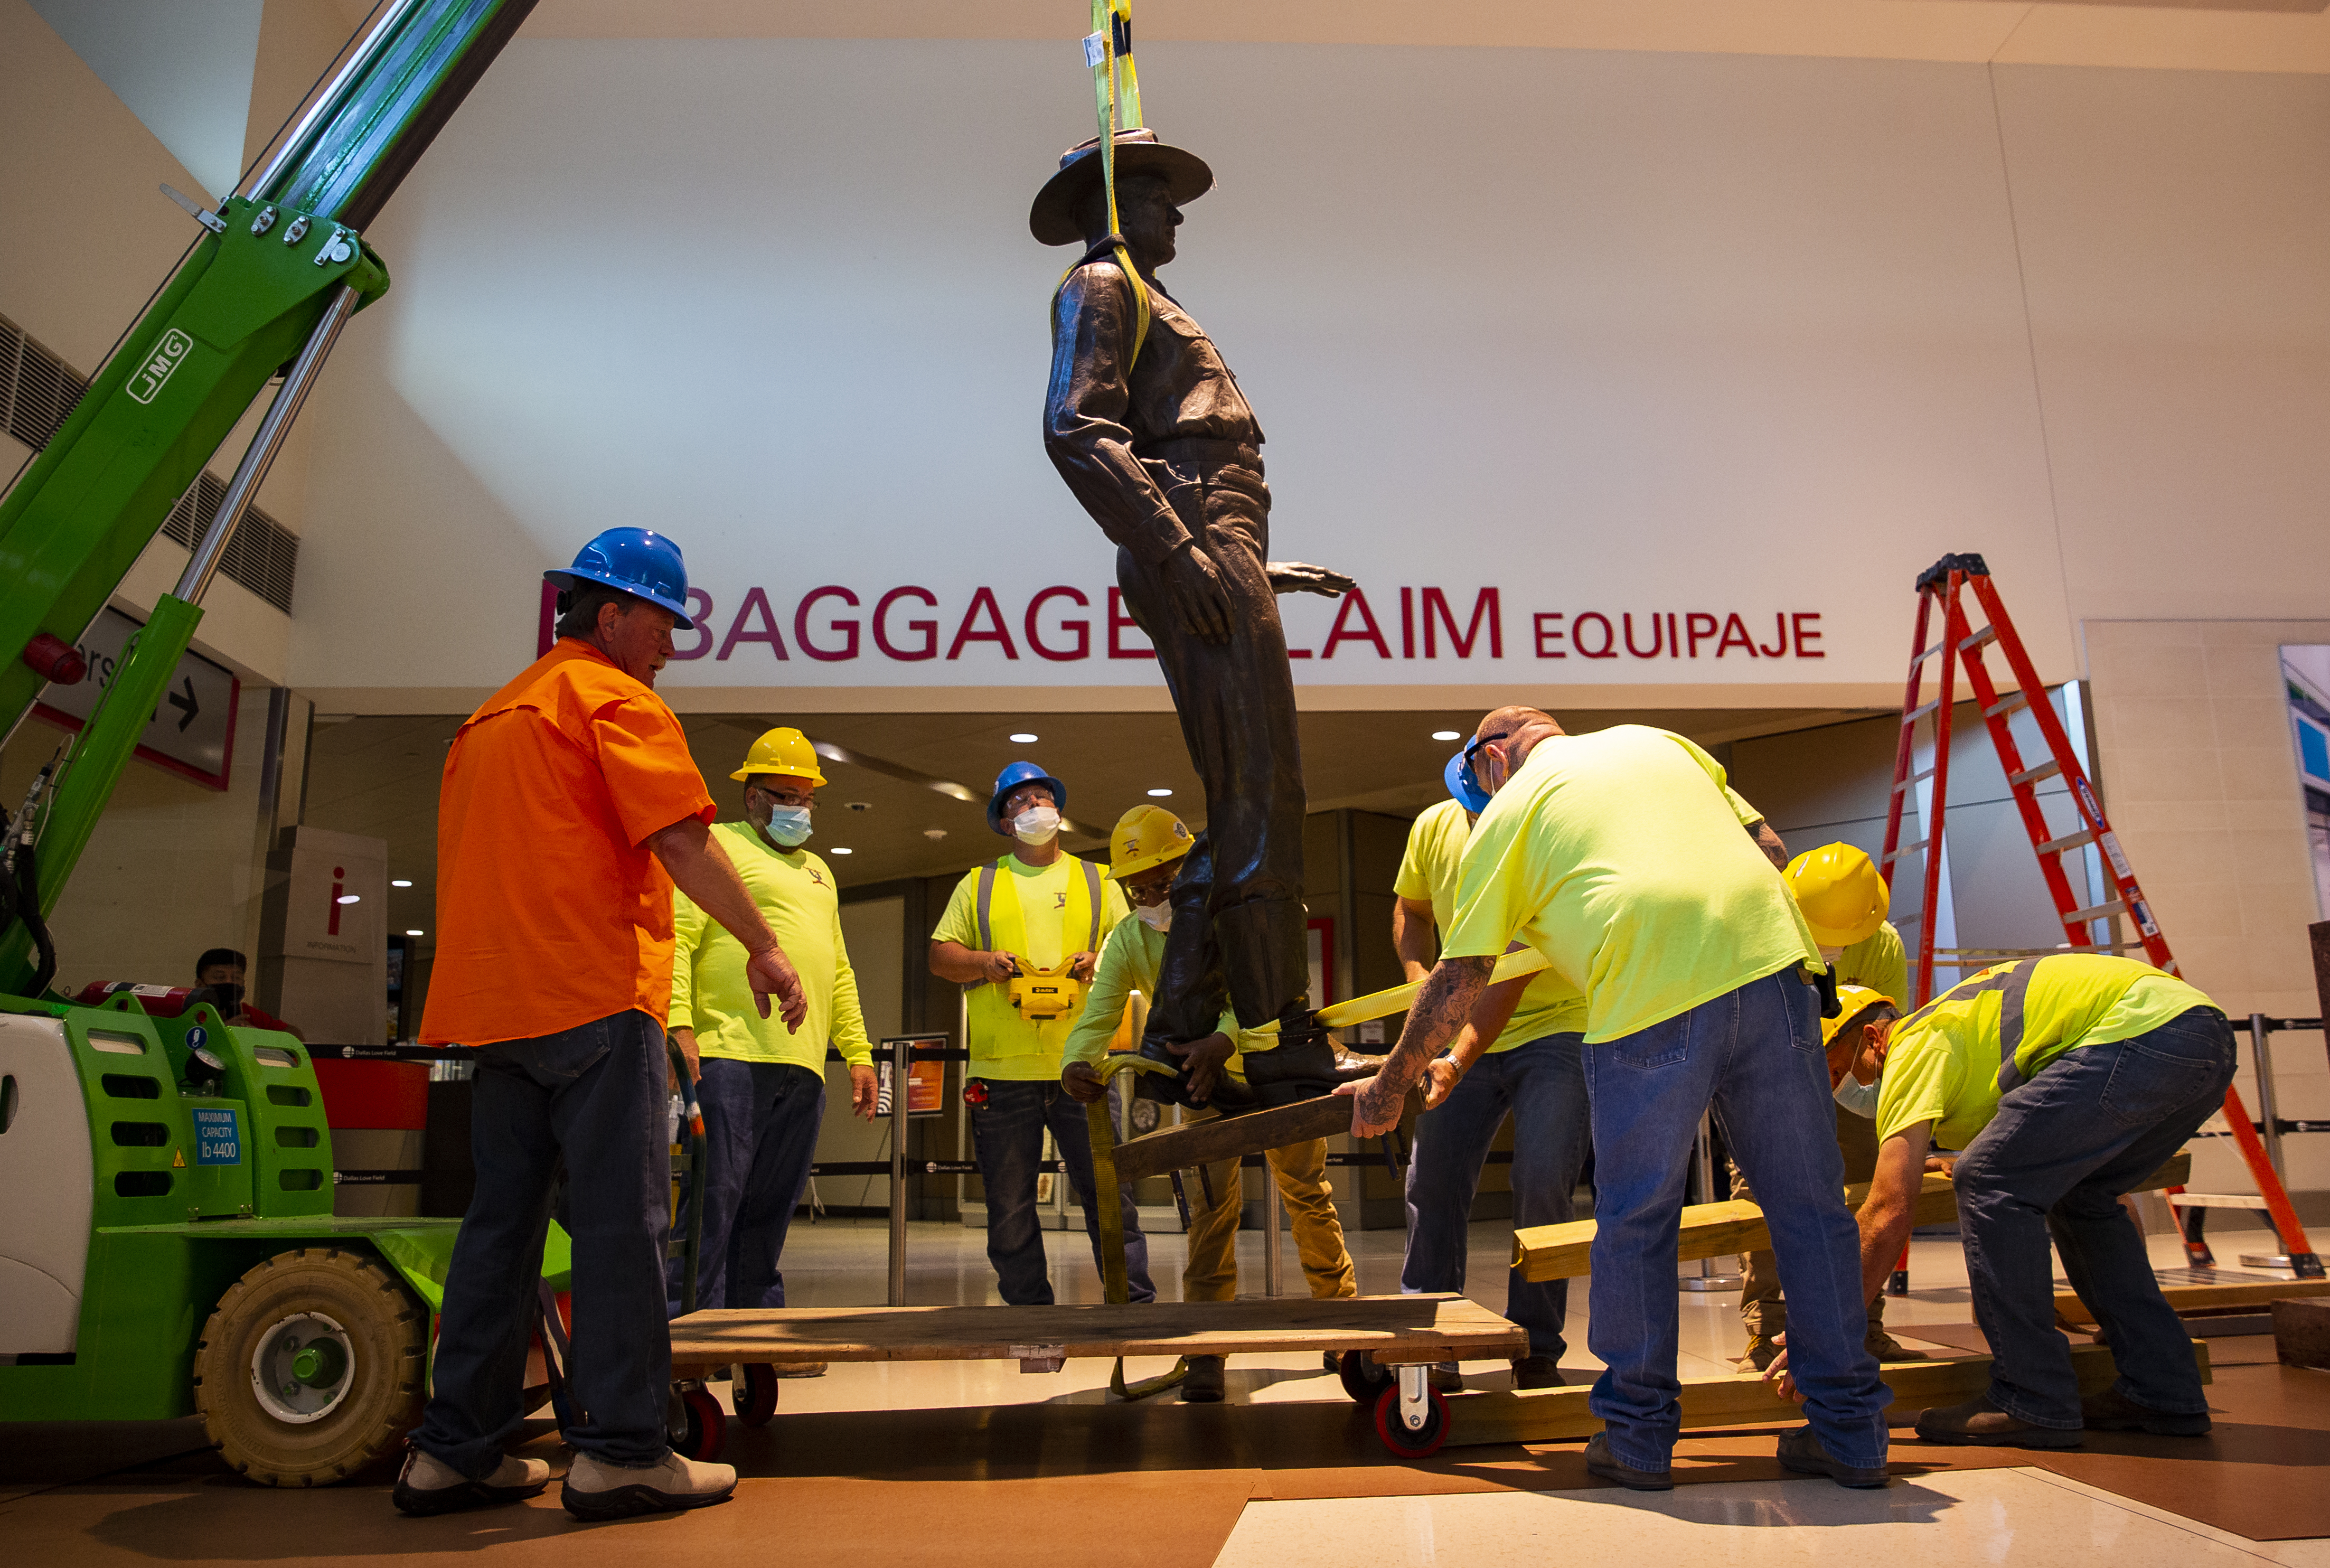 Texas Ranger statue at Love Field removed over concerns about the